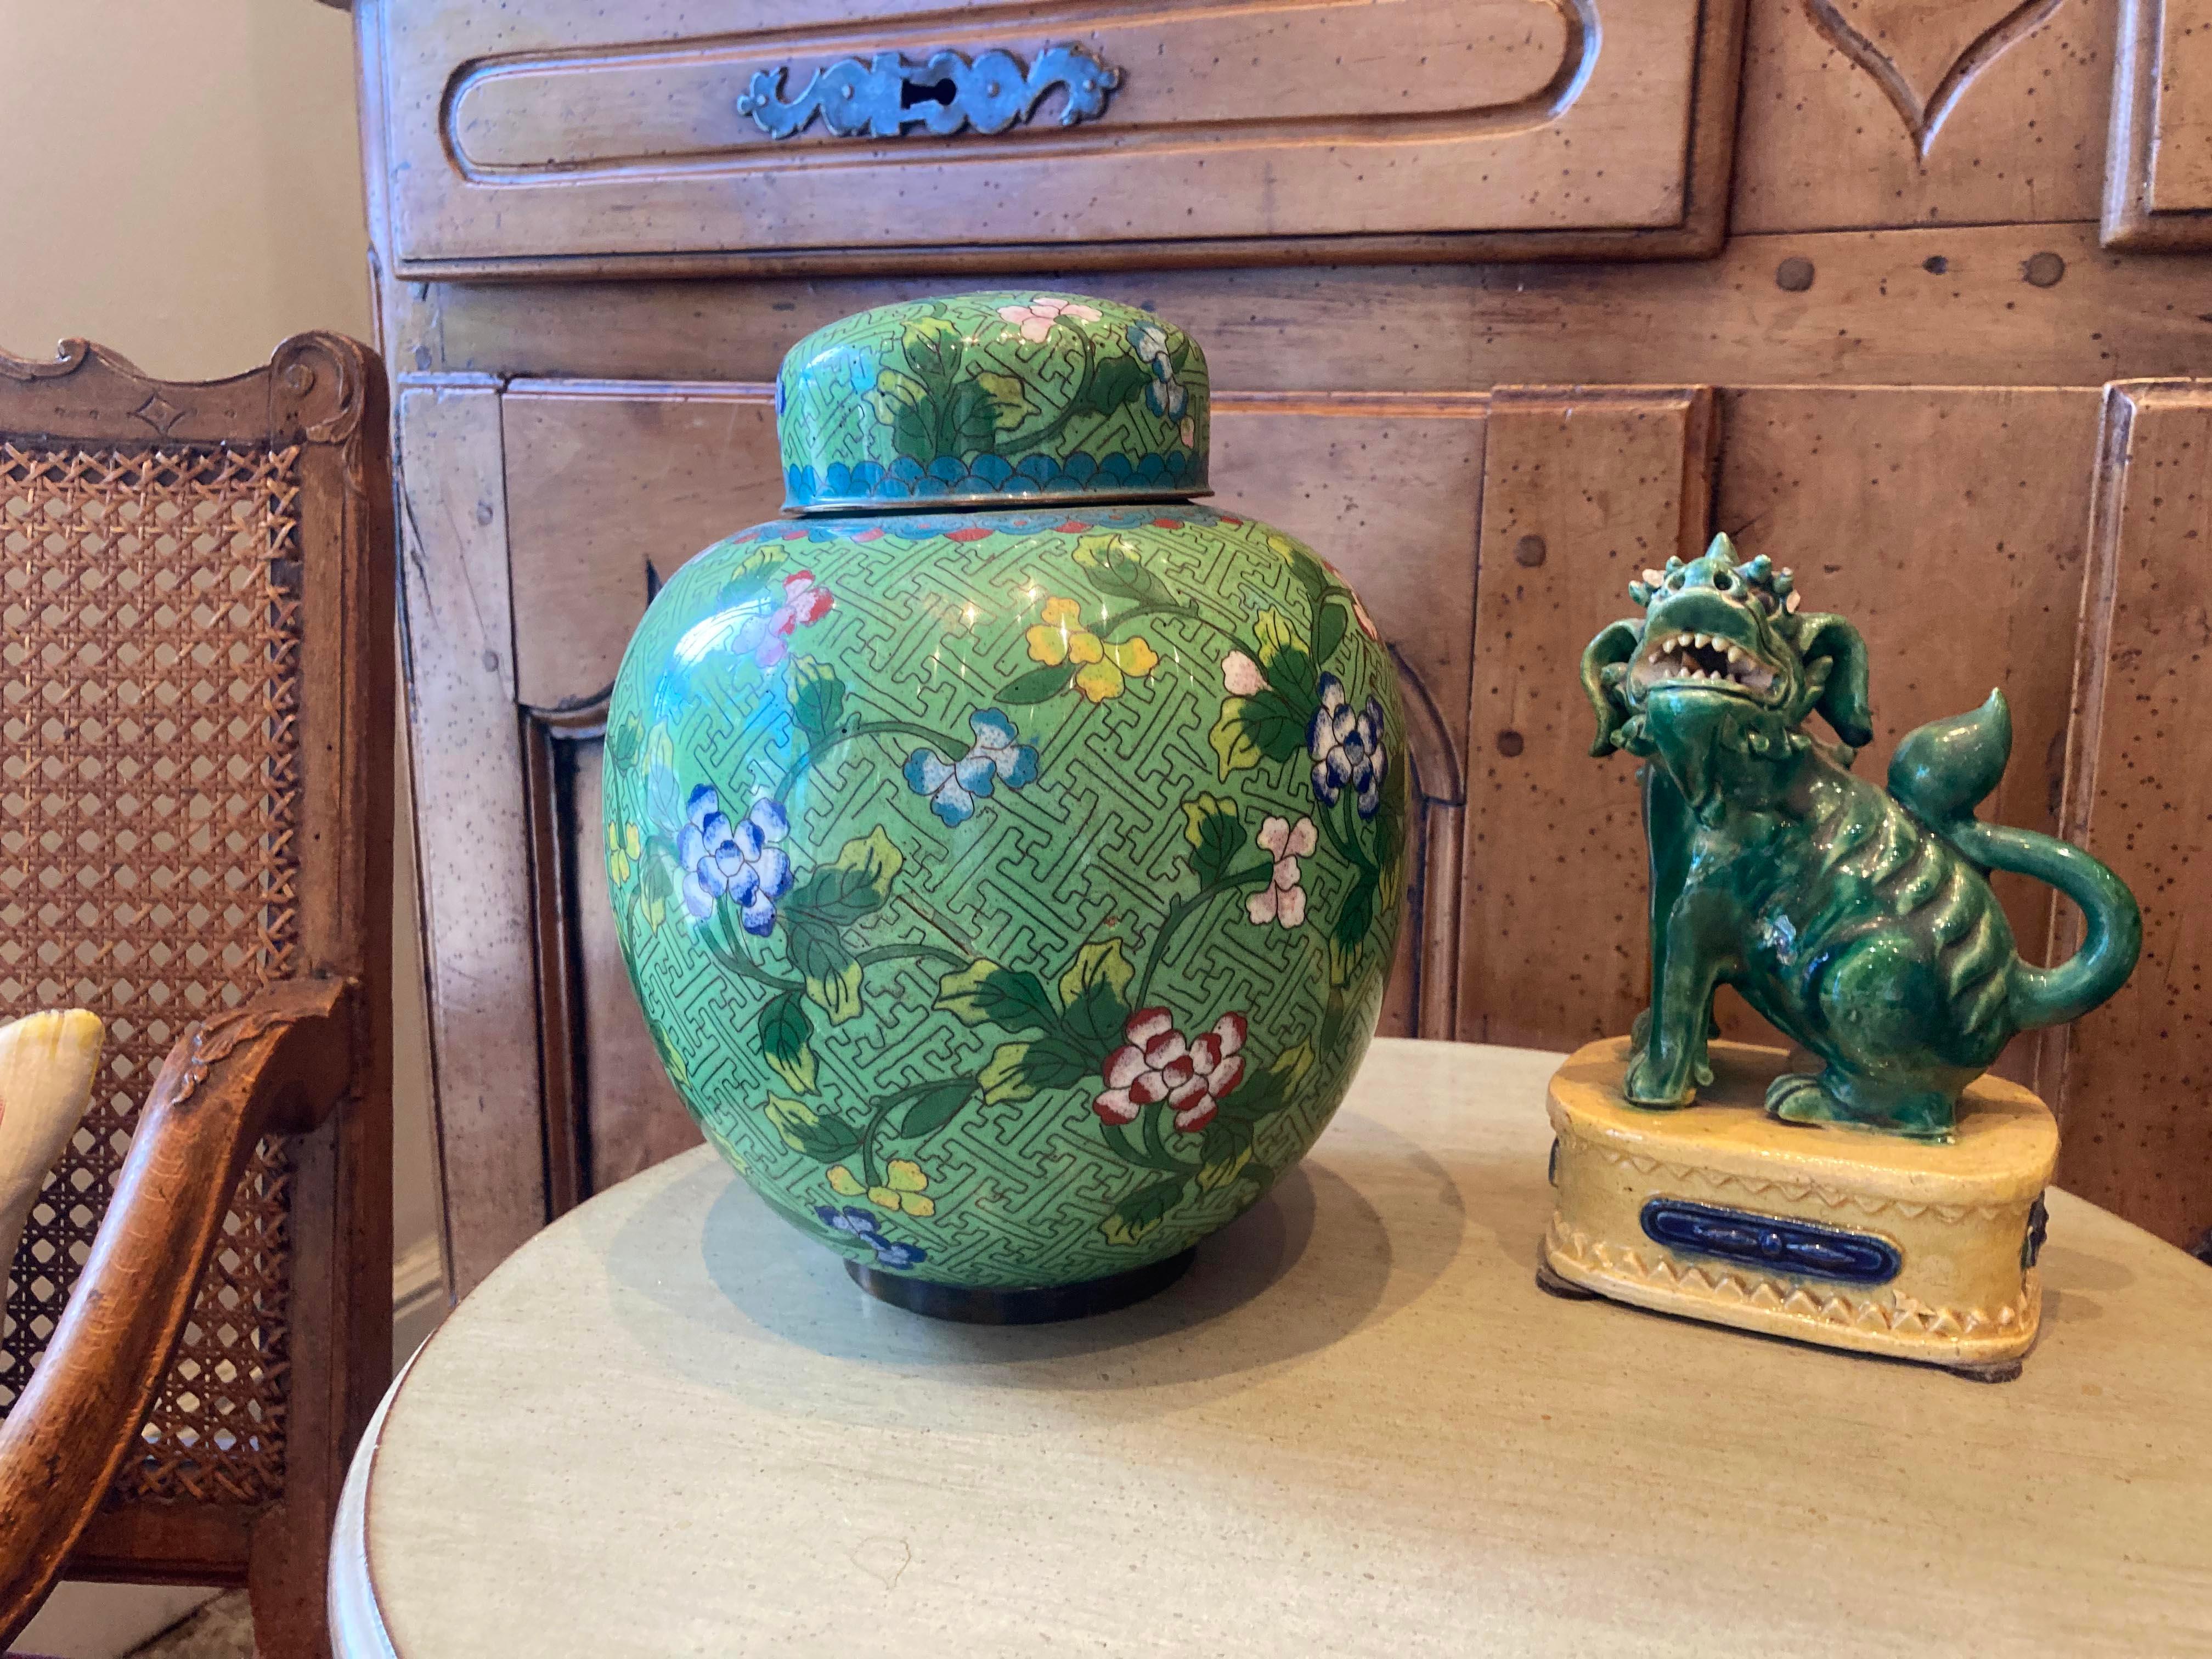 Green cloisonné jar is in excellent condition with beautiful lustre to the smooth finish of the enamel. The removable lid interior is a sky blue enamel as well as the interior of the jar. Features beautiful intricate diapered background pattern.